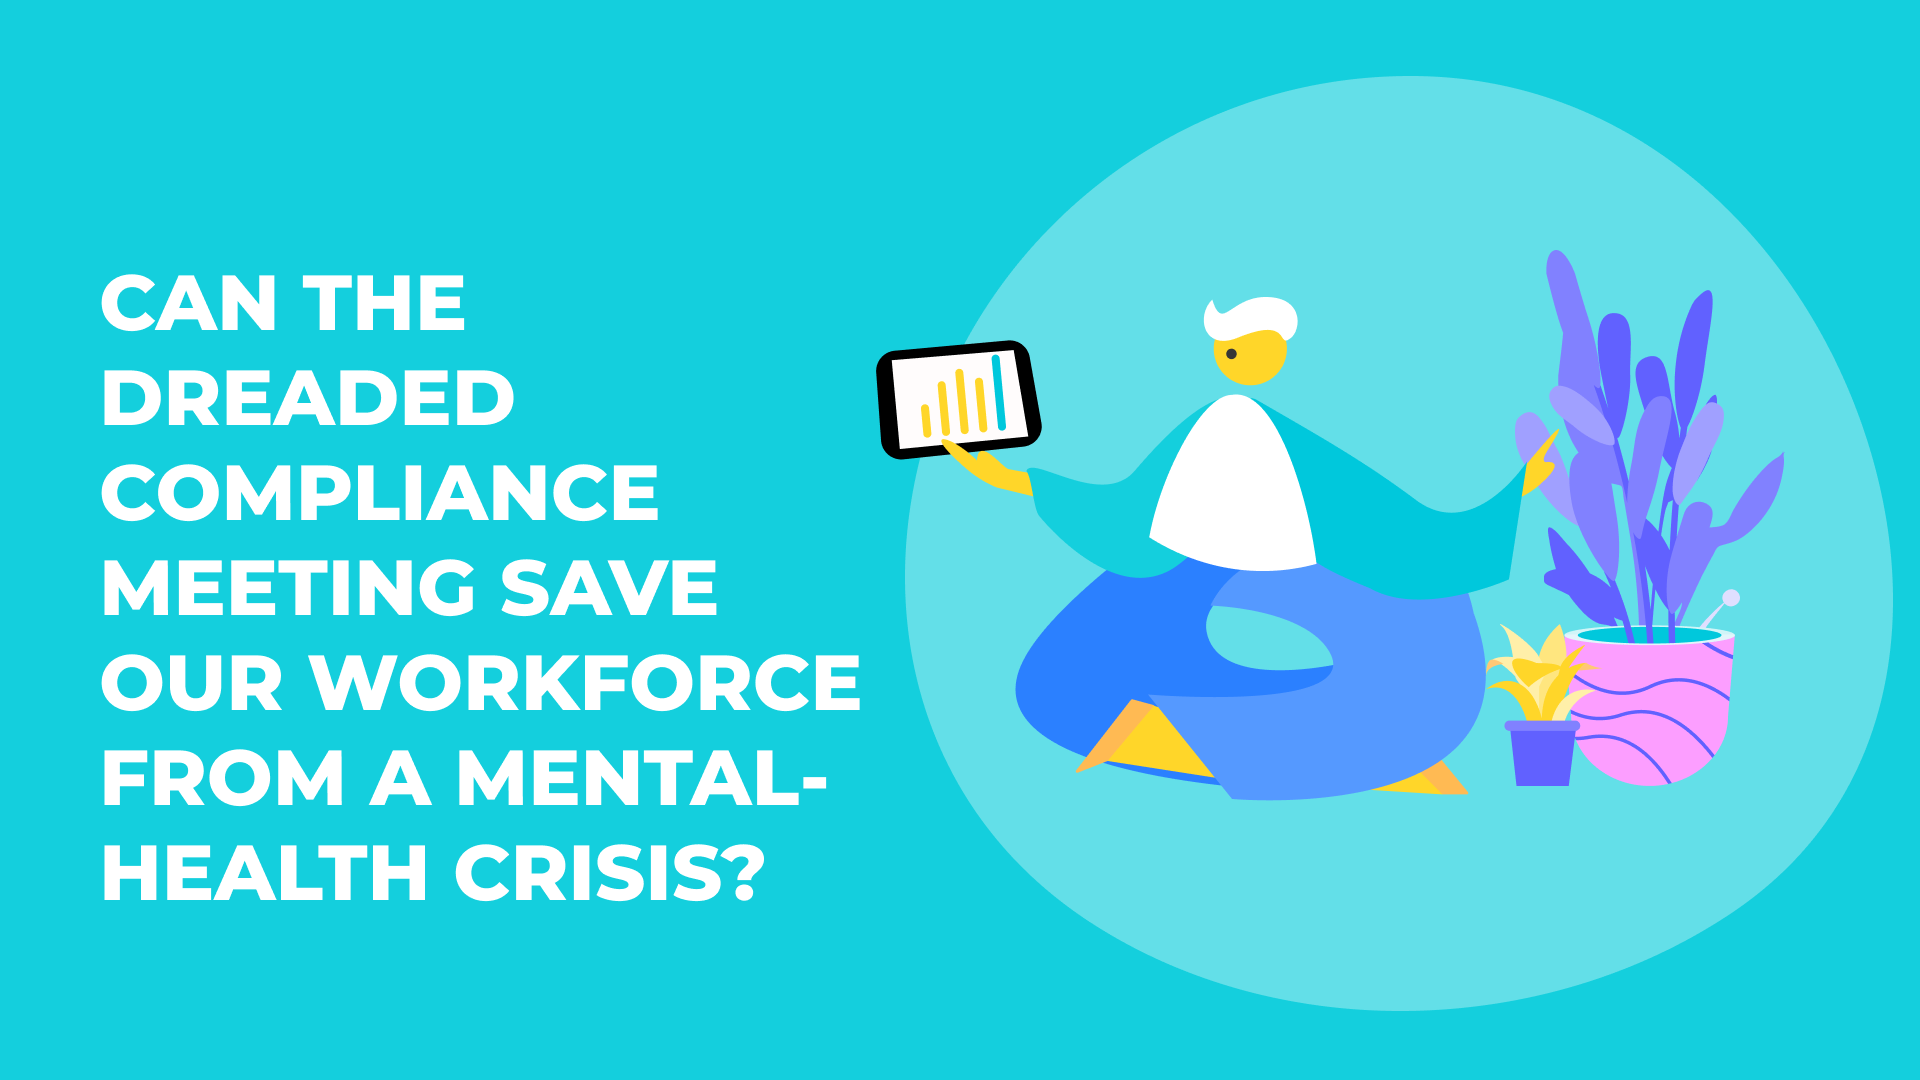 Can The Dreaded Compliance Meeting Save Our Workforce From A Mental-health Crisis?